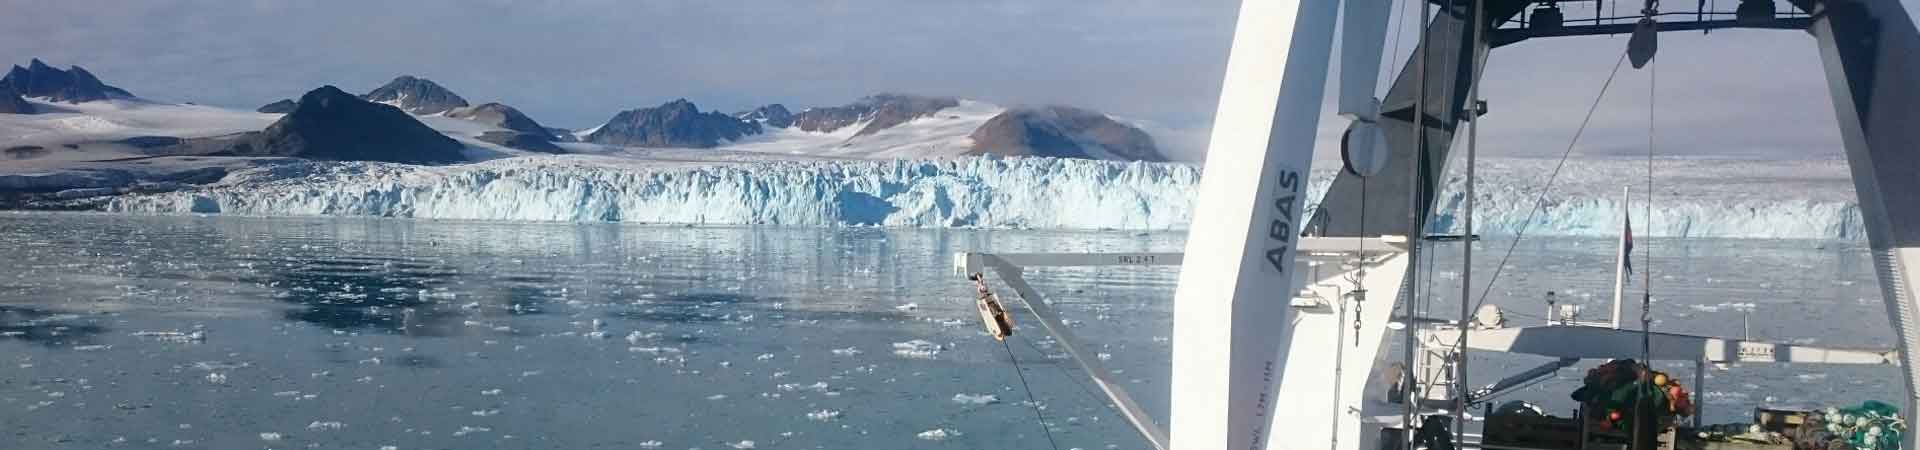 View from icebreaker research vessel of Arctic glacier